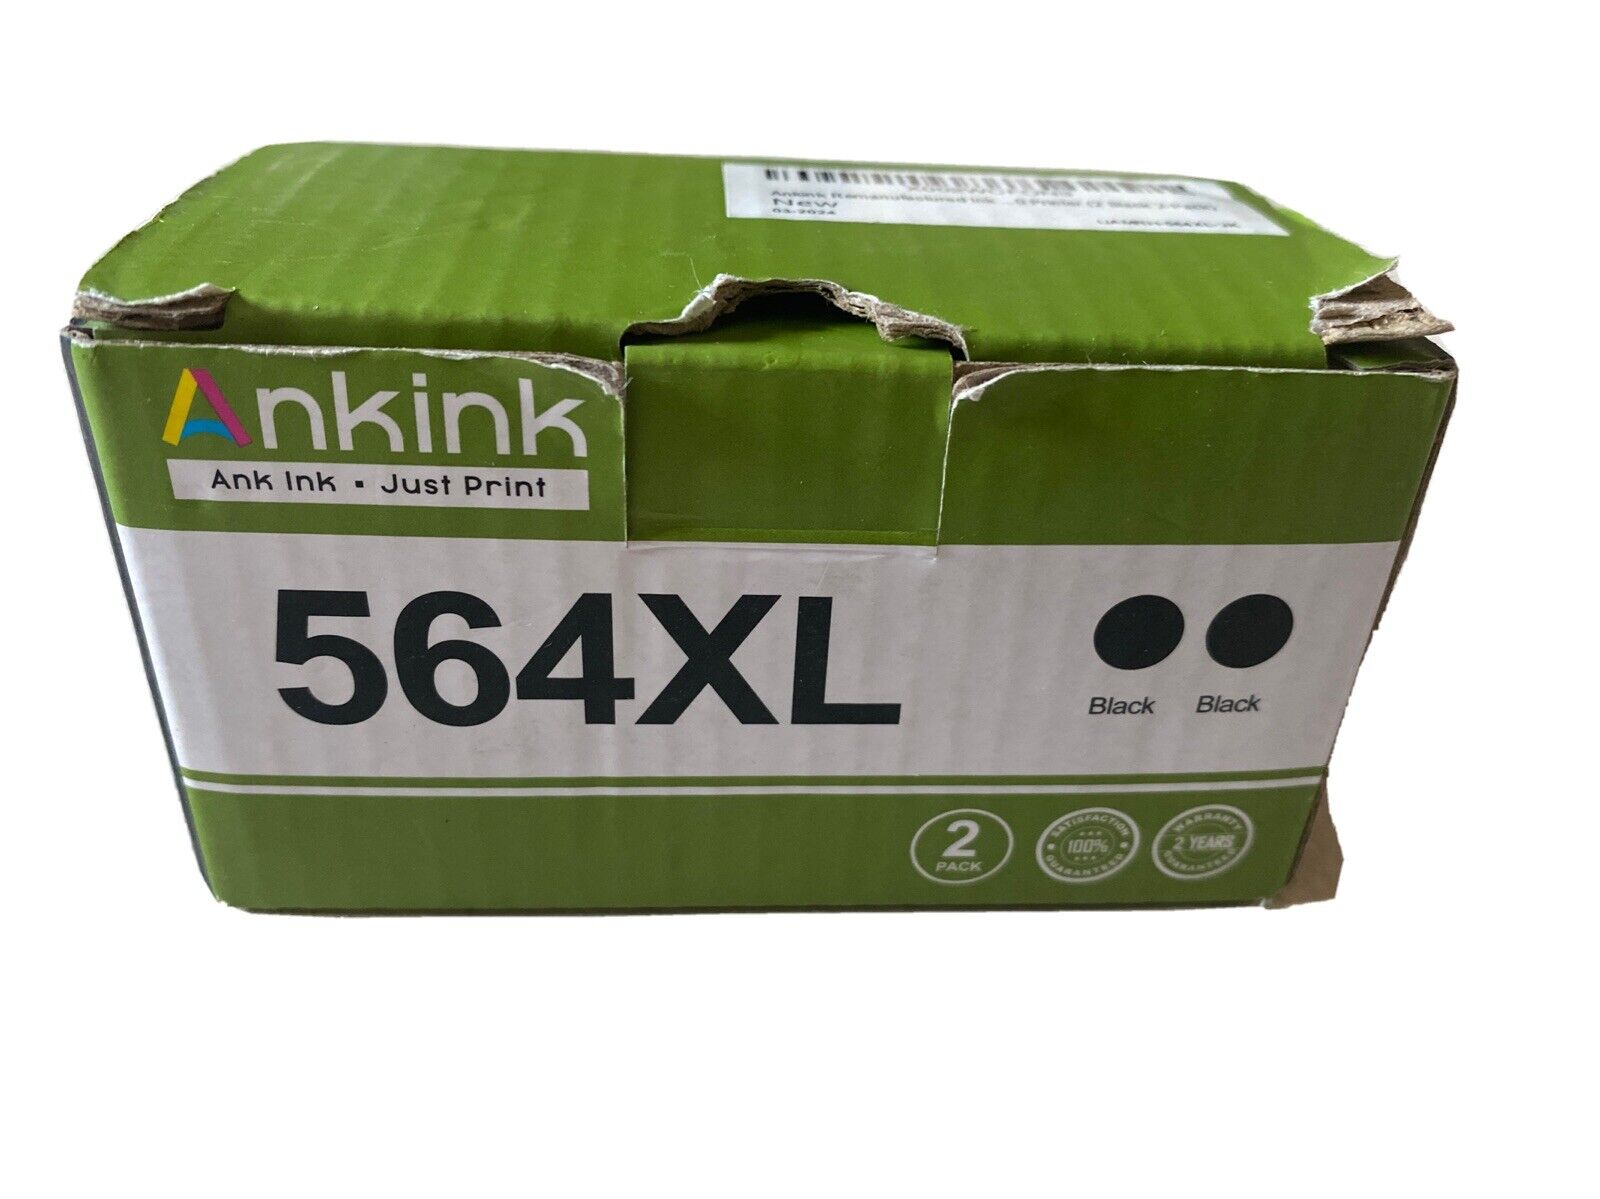 🆕 Ankink 564XL Compatible Ink Cartridges 2-pack Factory Sealed, Black 